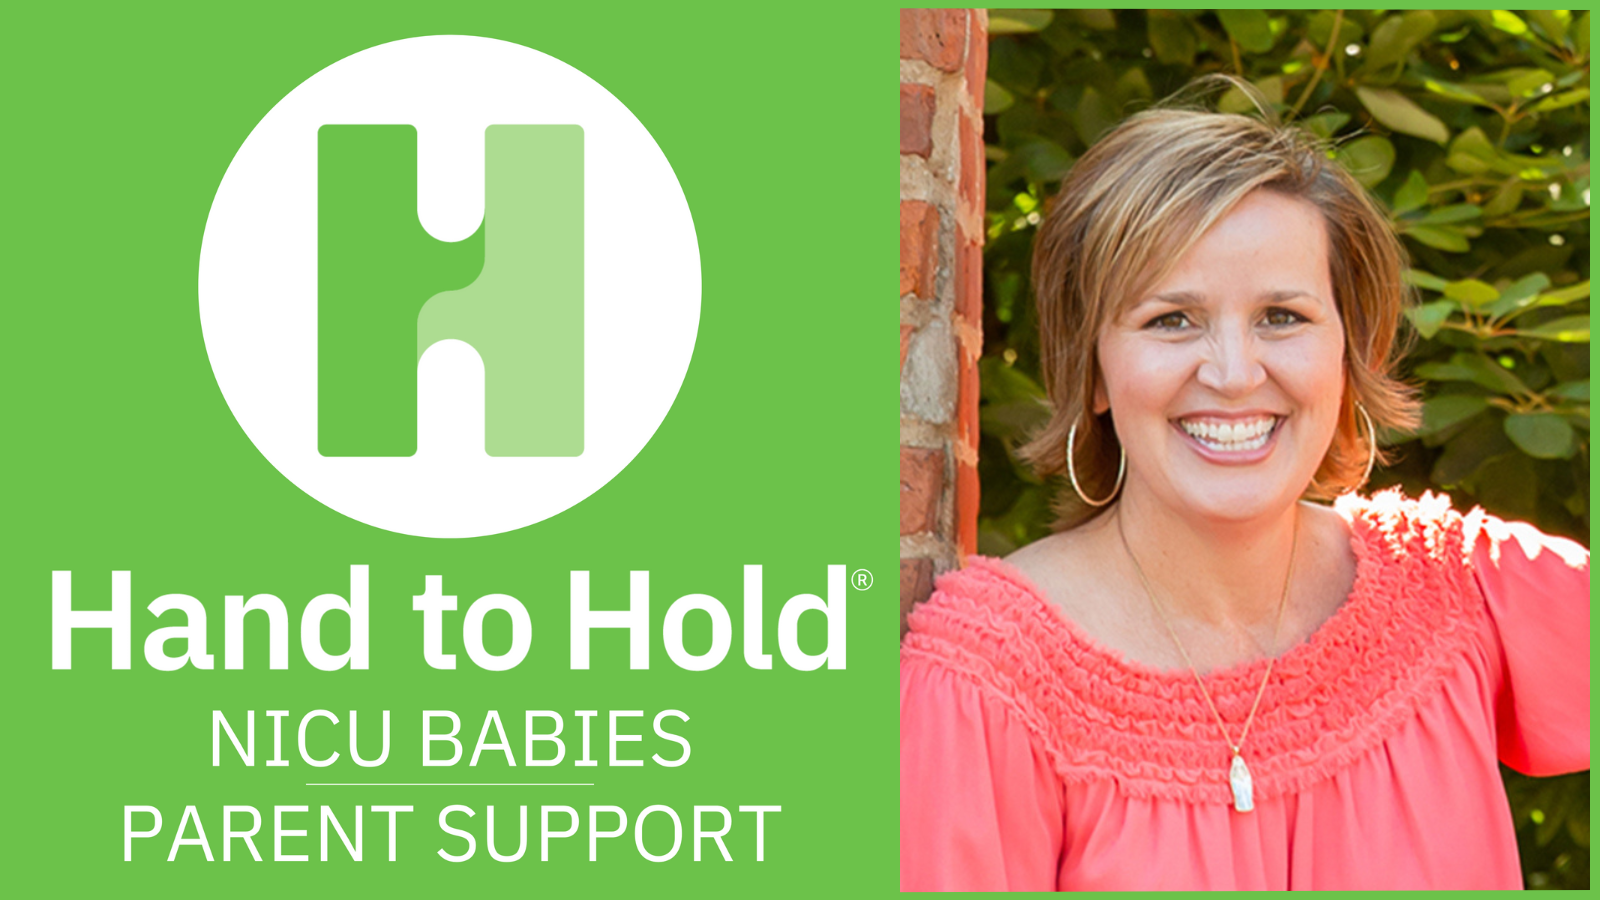 NICU Babies Parent Support podcast hand to hold Kathryn Whitaker